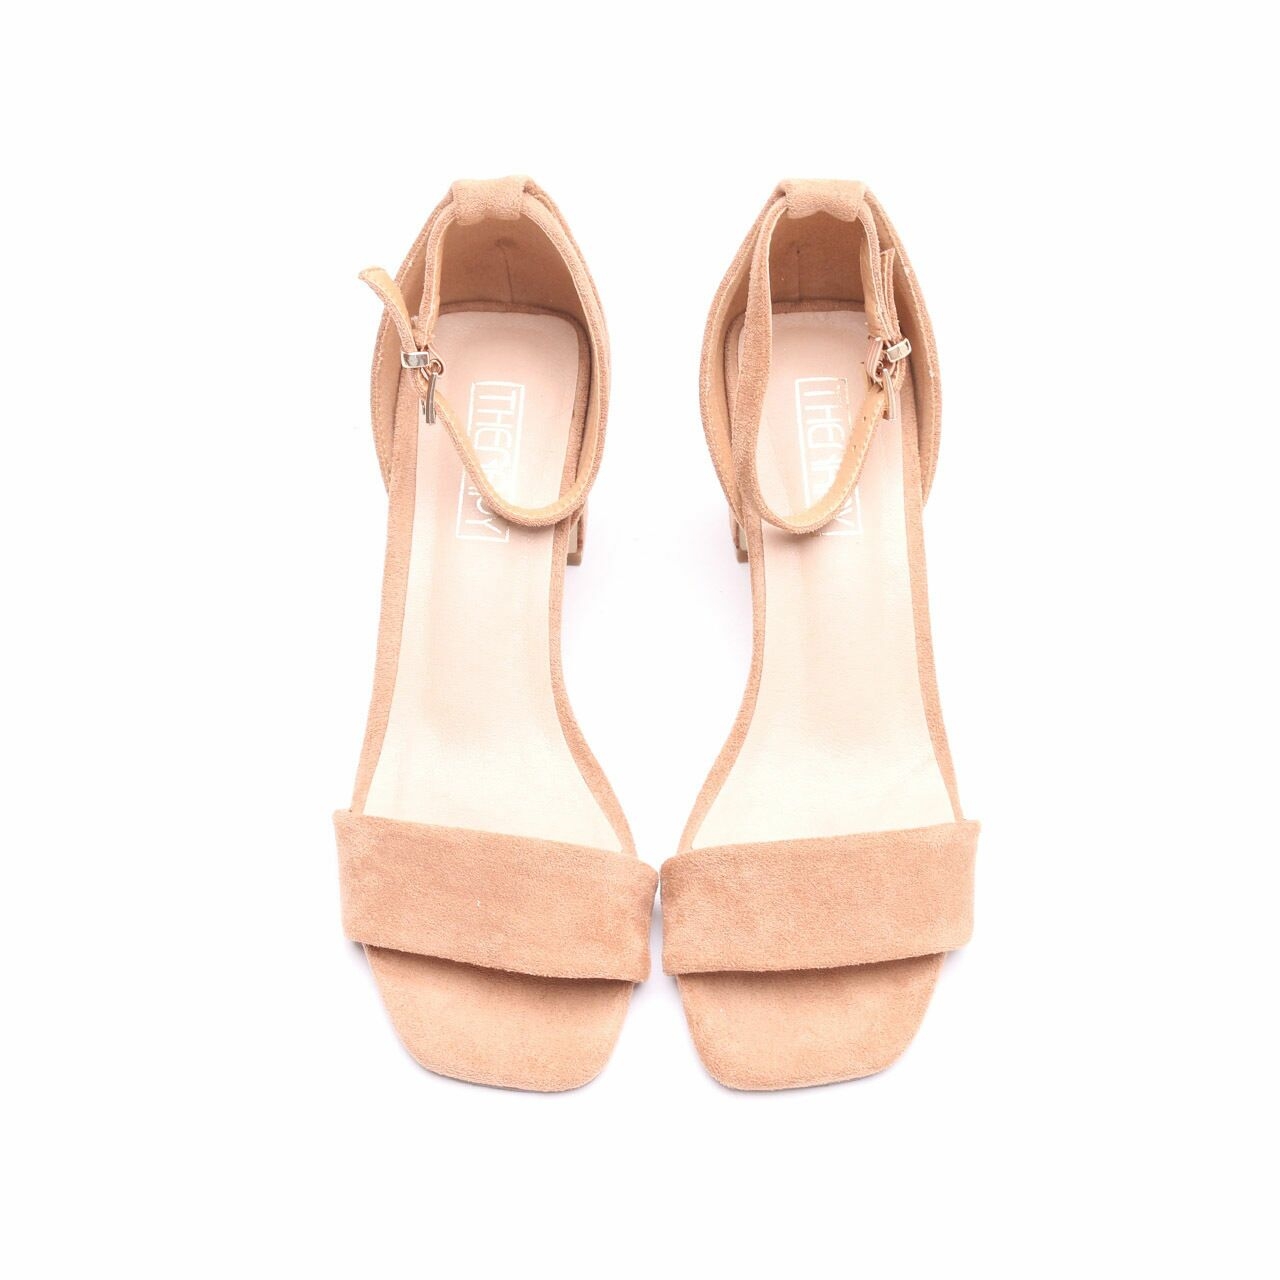 Therapy Mocca Suede Heels